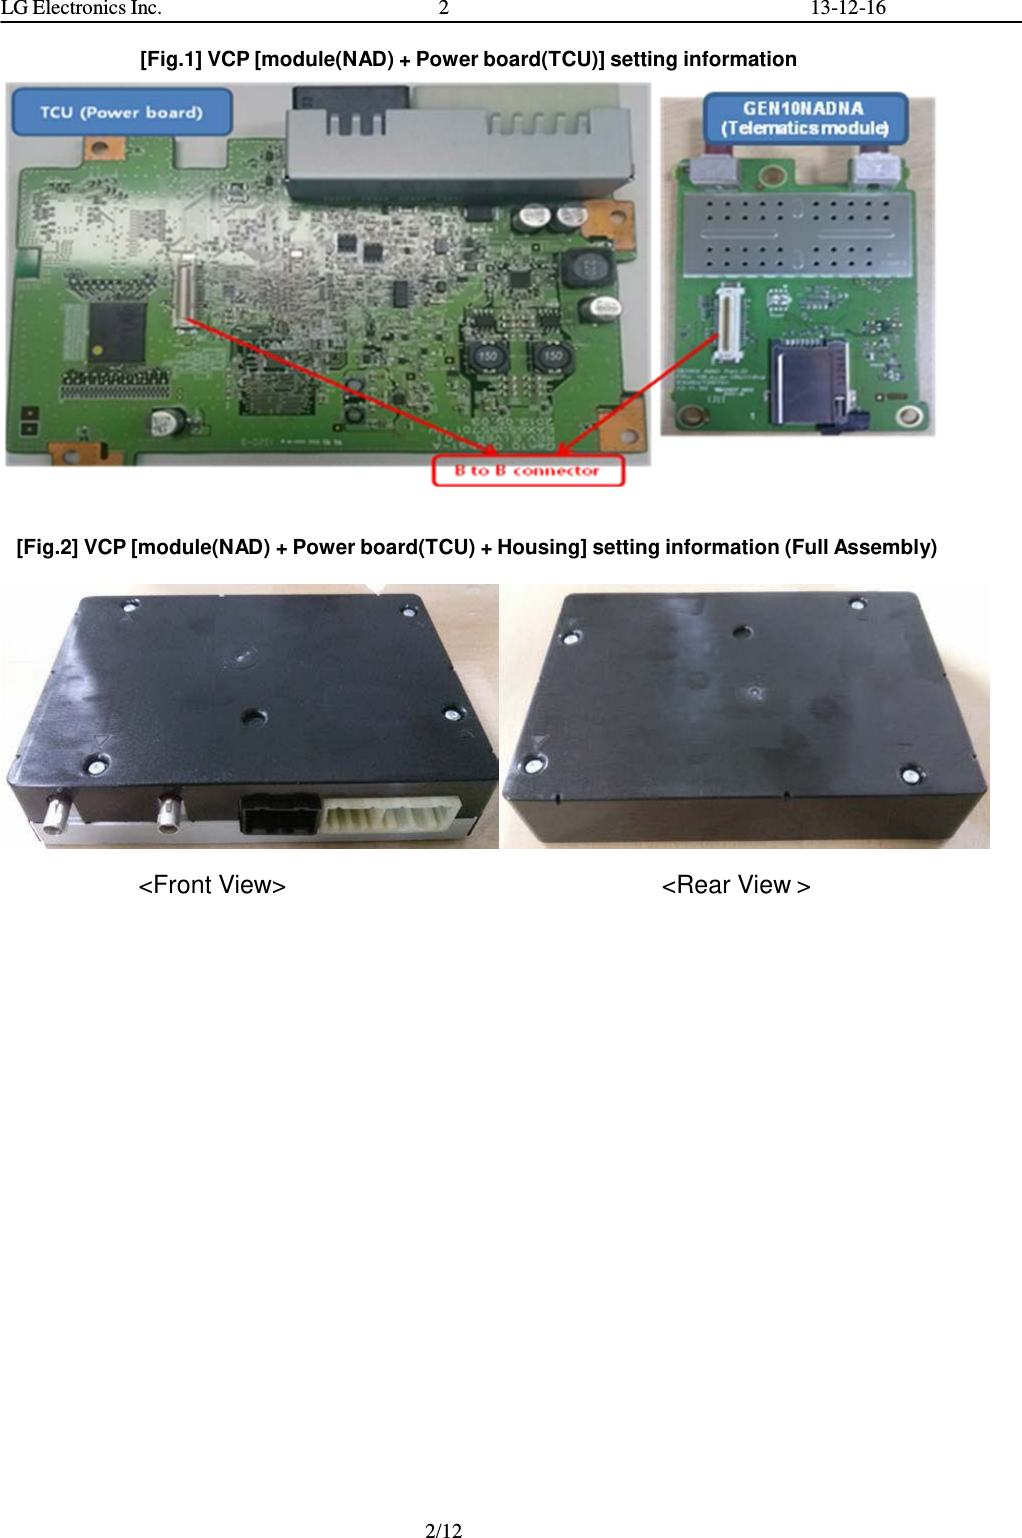 LG Electronics Inc. 2 13-12-16   [Fig.1] VCP [module(NAD) + Power board(TCU)] setting information    [Fig.2] VCP [module(NAD) + Power board(TCU) + Housing] setting information (Full Assembly)    &lt;Front View&gt;  &lt;Rear View &gt; 2/12  